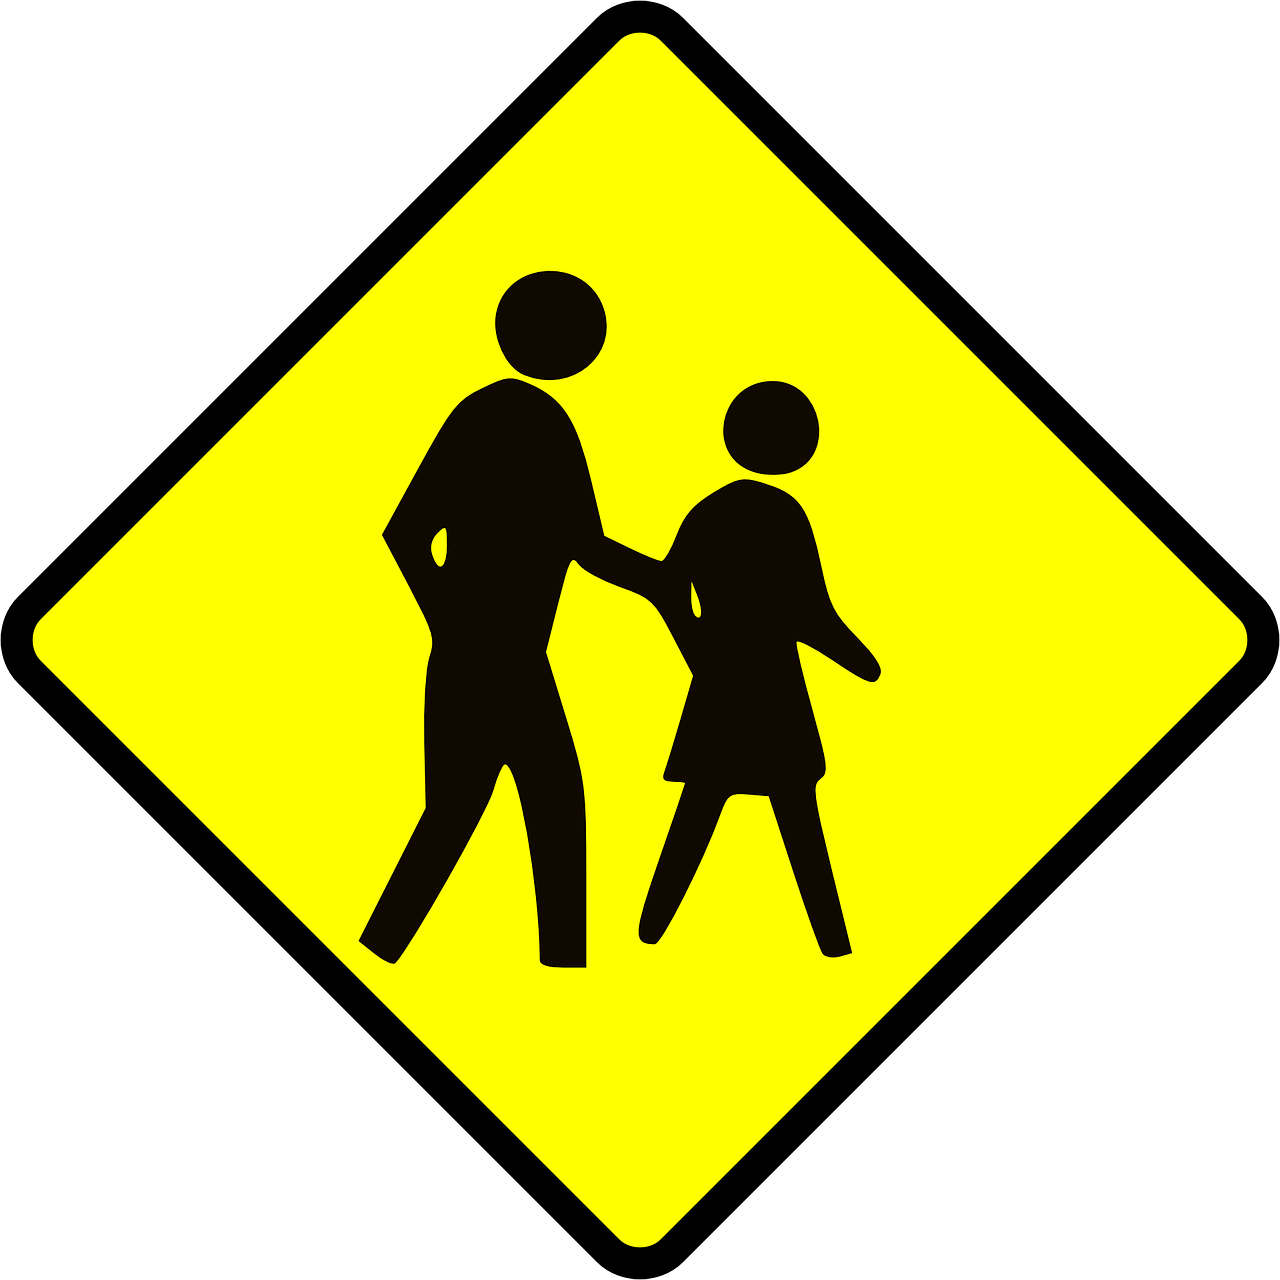 signs pedestrian crossing free photo